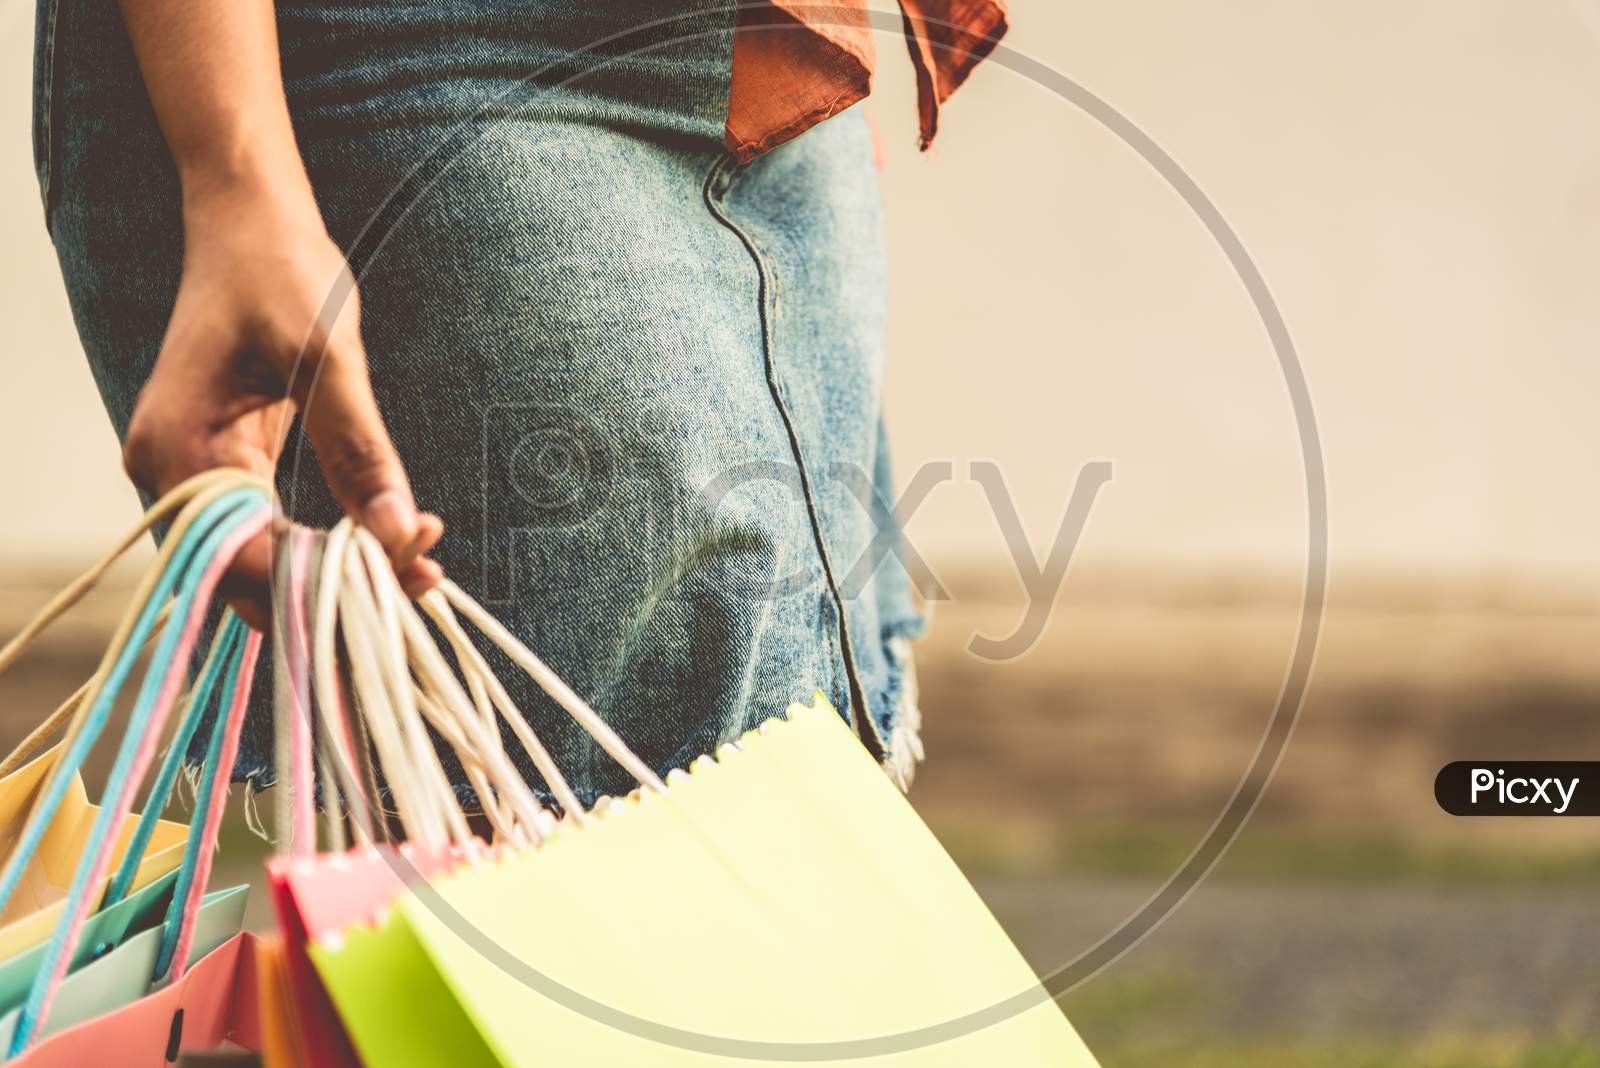 Closeup Of Woman Holding Color Paper Shopping Bag At Street. Summer Sale And Black Friday Shopping Concept. Vintage Tone Film In Cover Size Photo.